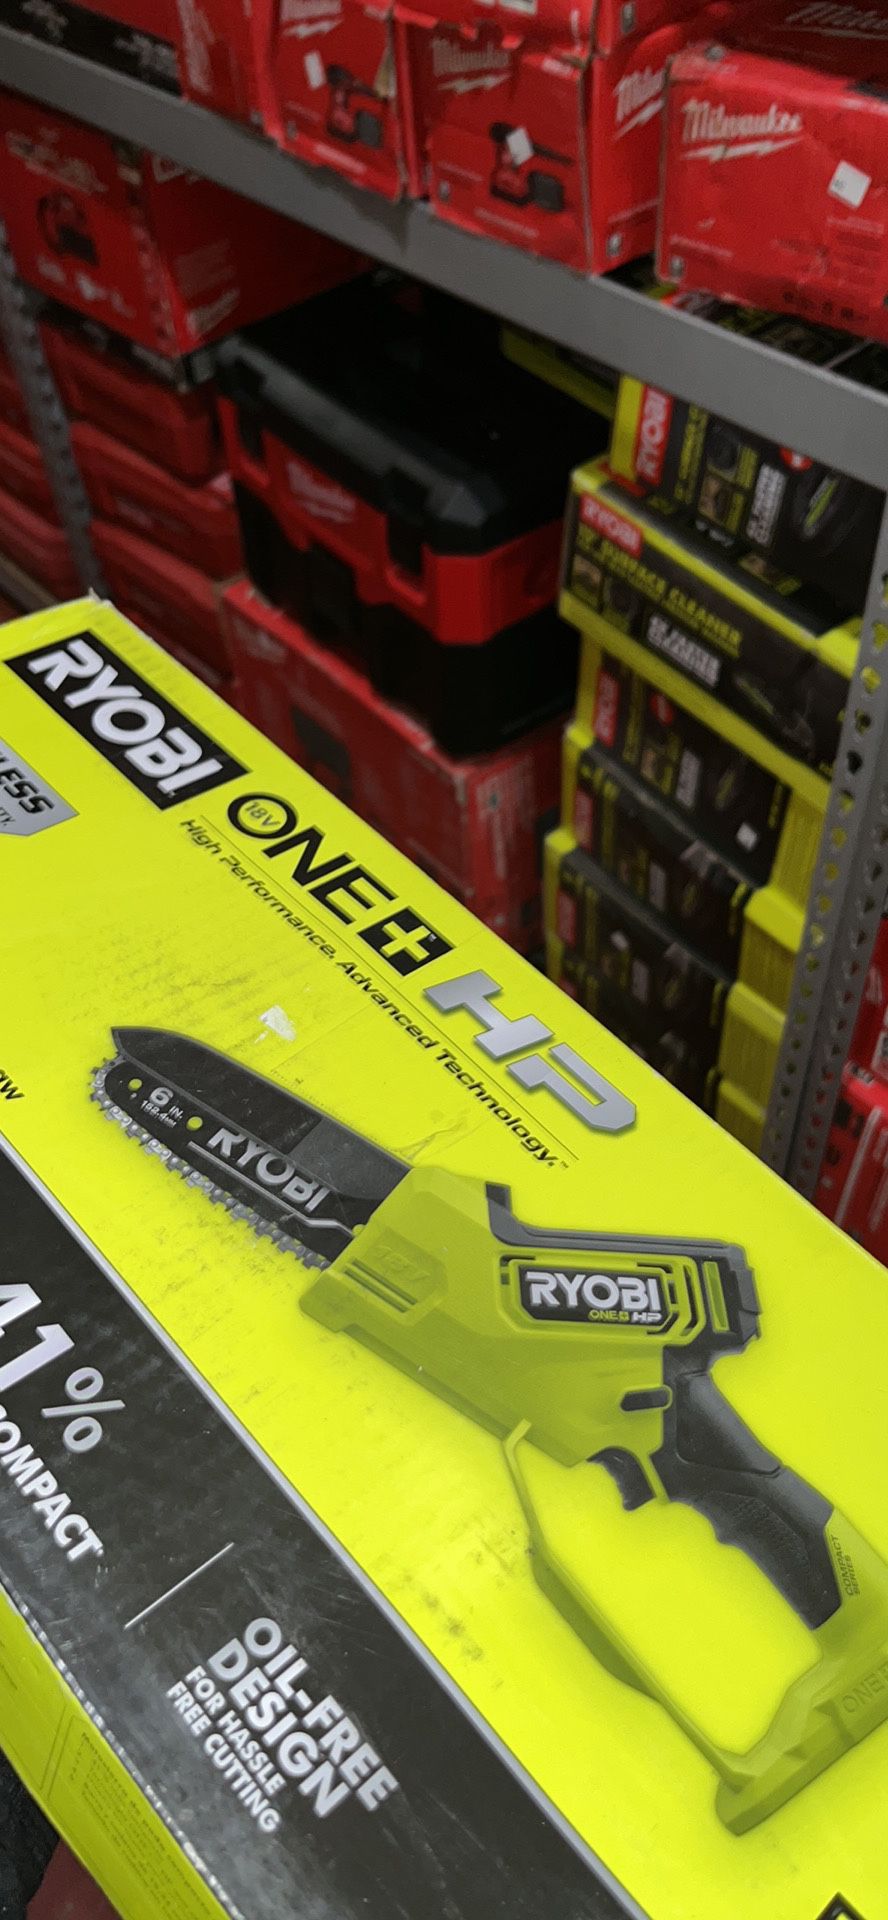 18 Volt Ryobi Compact Brushless Pruning Chainsaw with Battery,Charger $200 